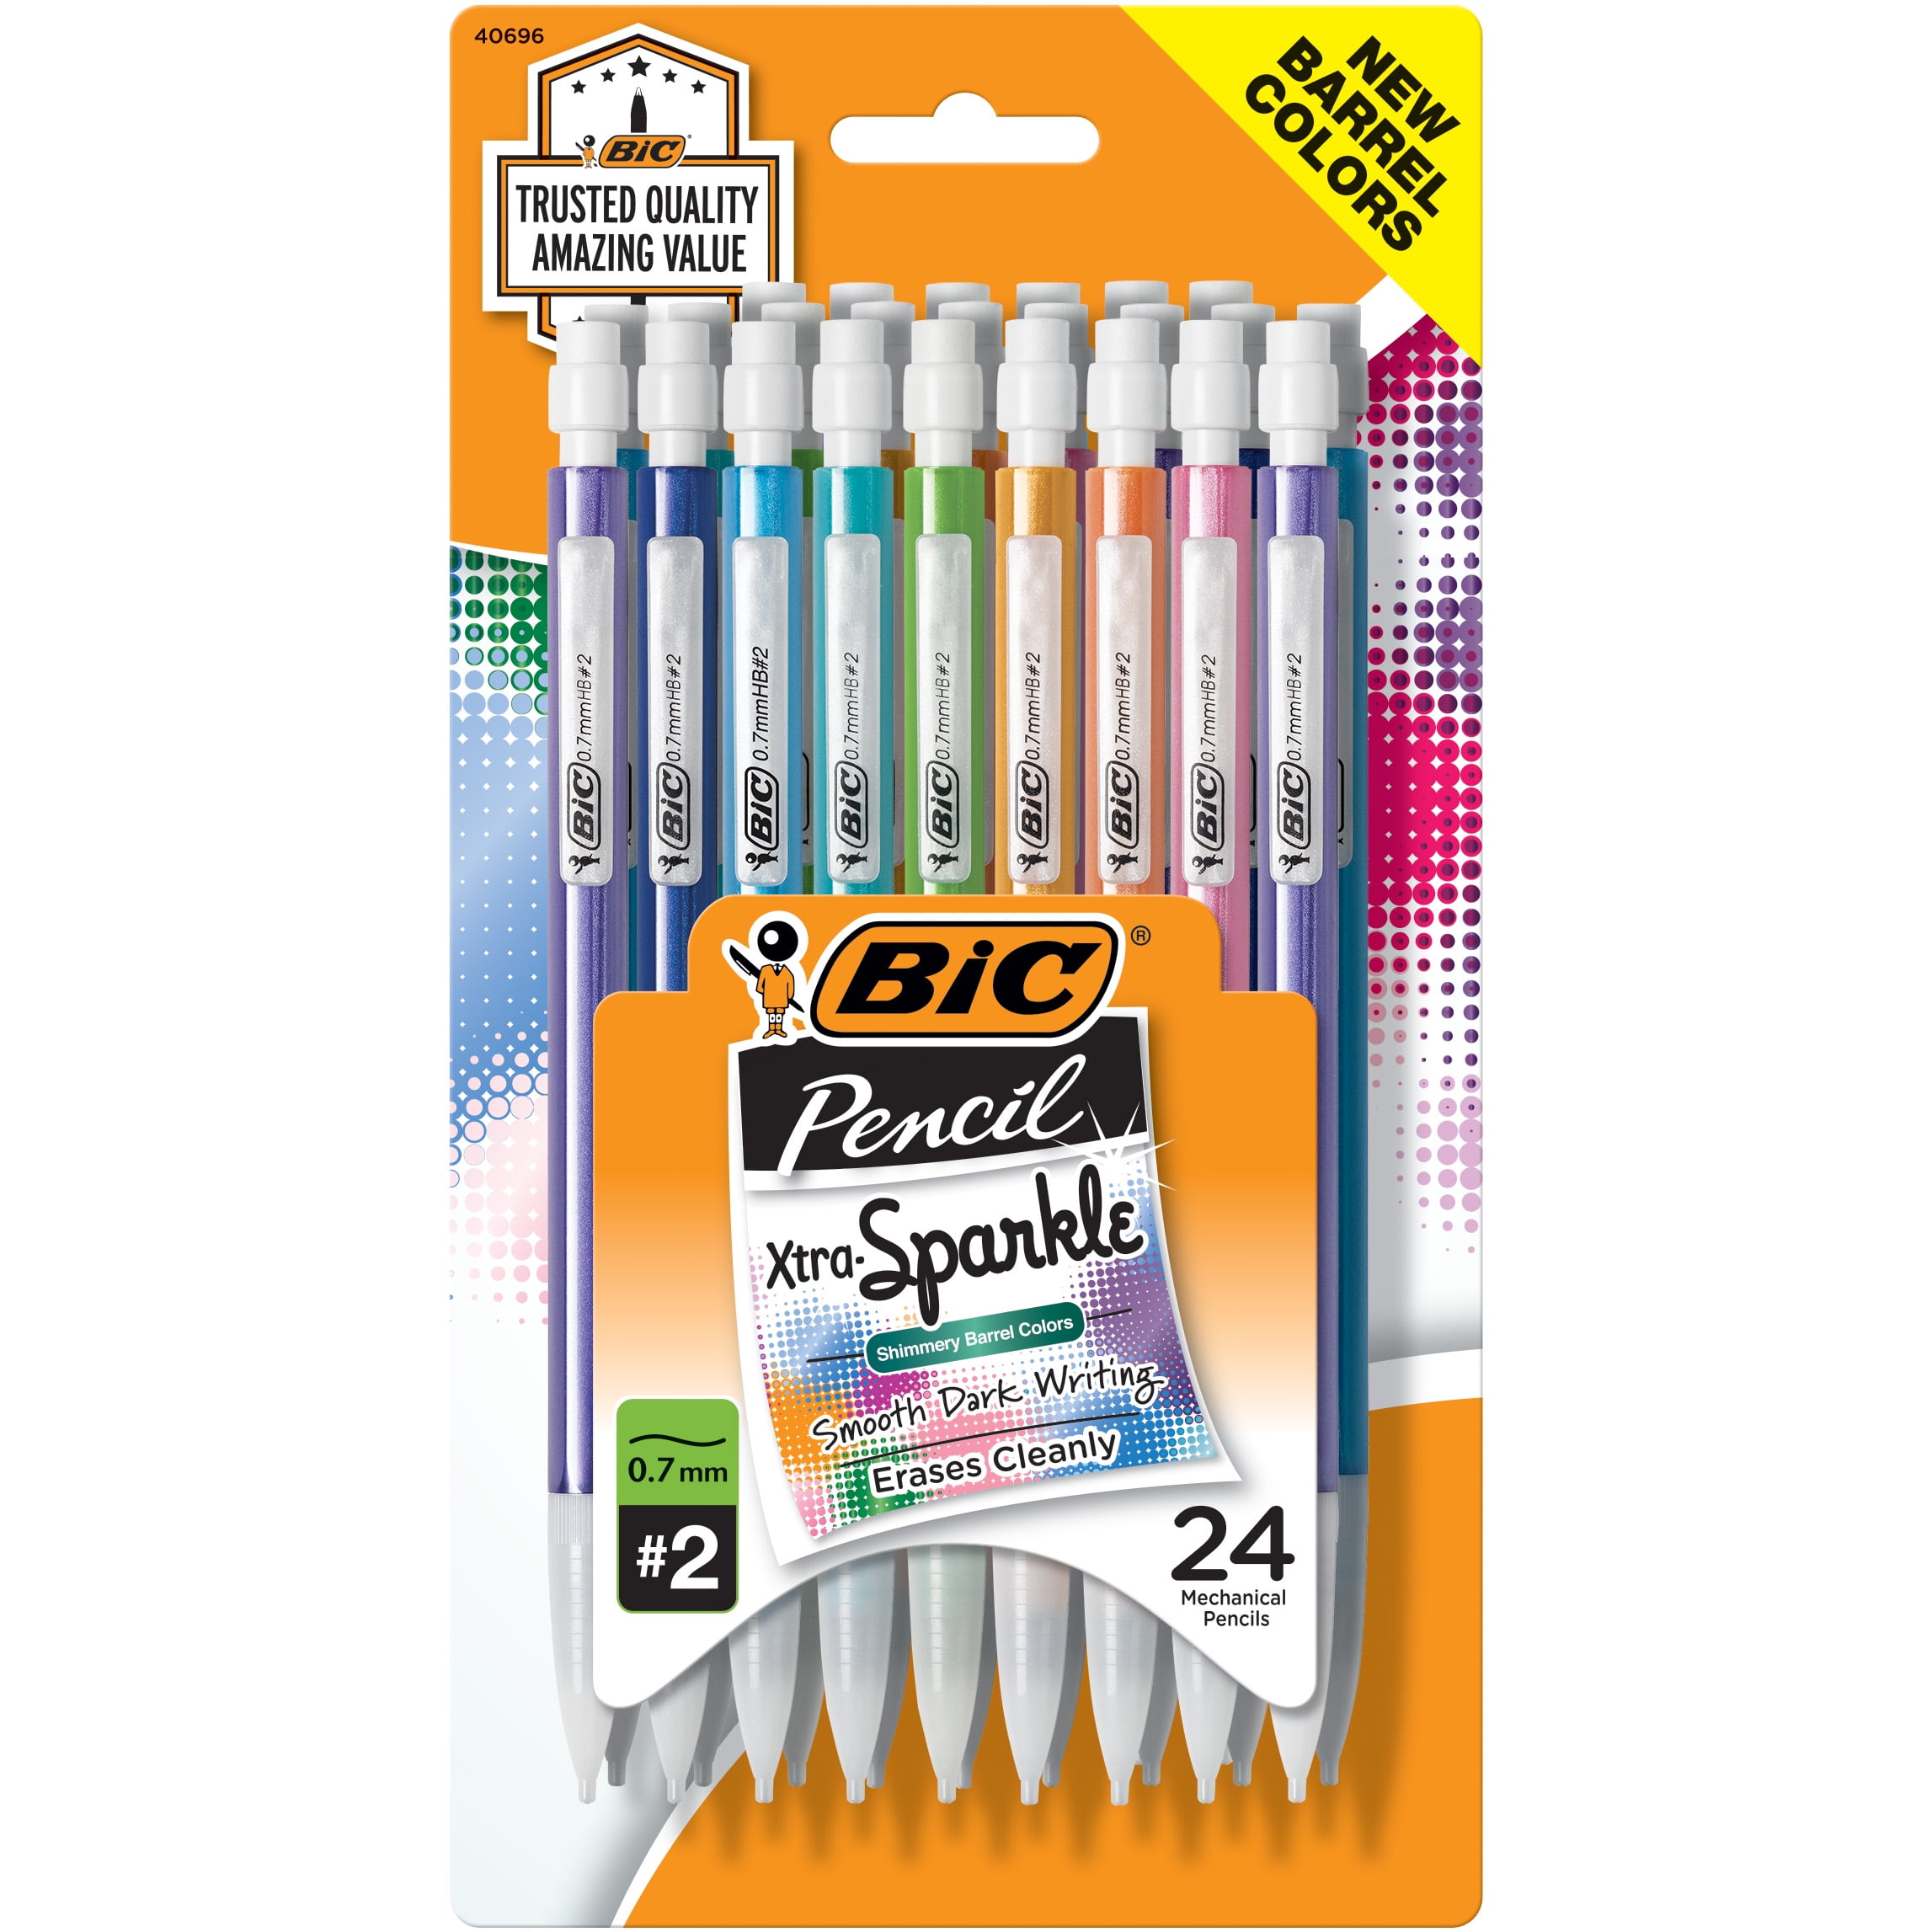 BICMPLP241, BIC® MPLP241 Xtra-Sparkle Mechanical Pencil Value Pack, 0.7  mm, HB (#2.5), Black Lead, Assorted Barrel Colors, 24/Pack